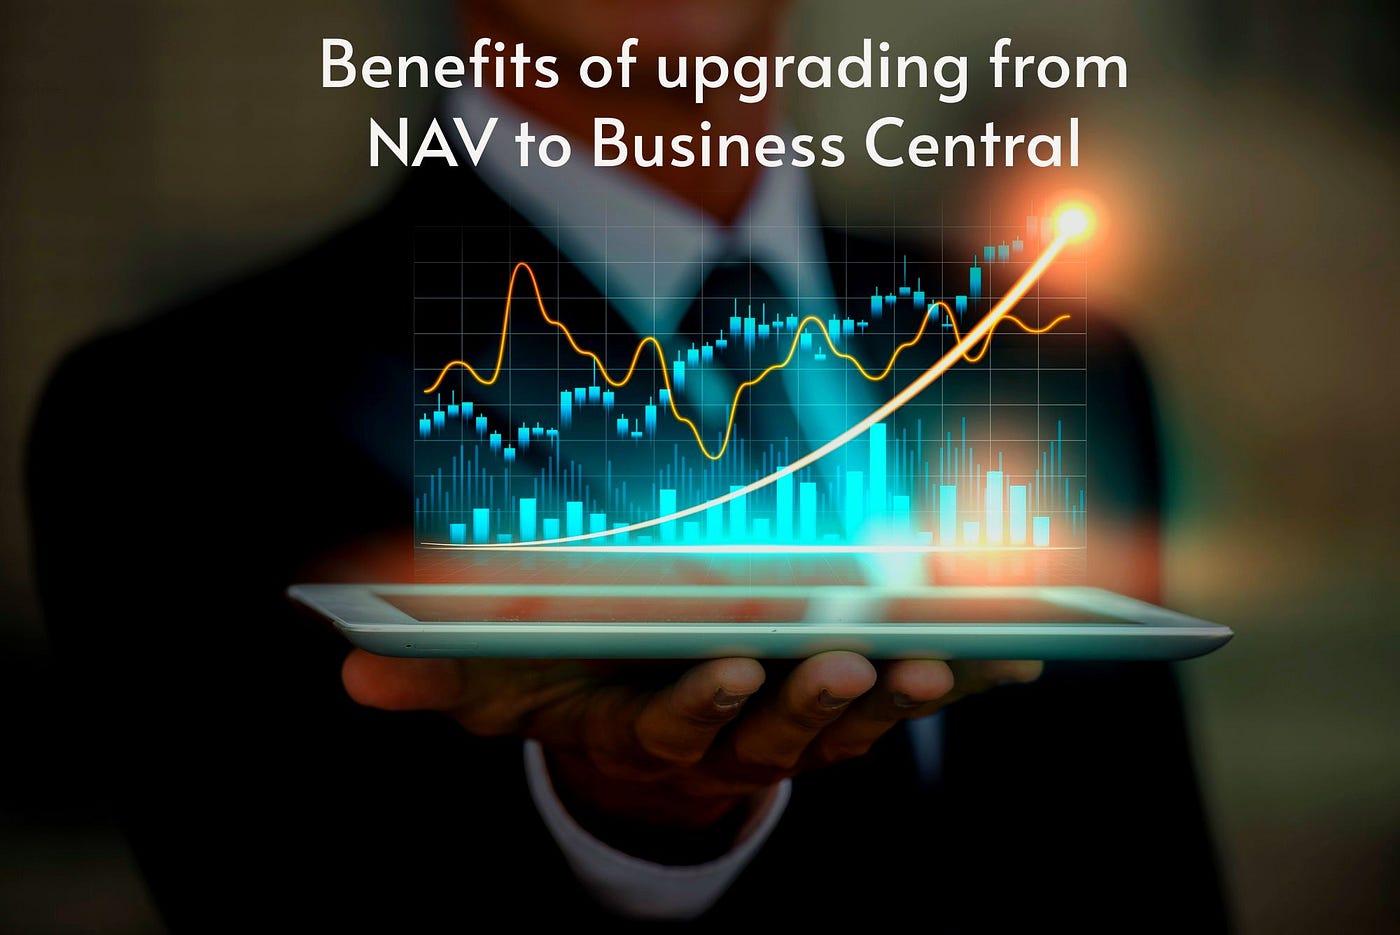 Benefits of upgrading from NAV to Business Central